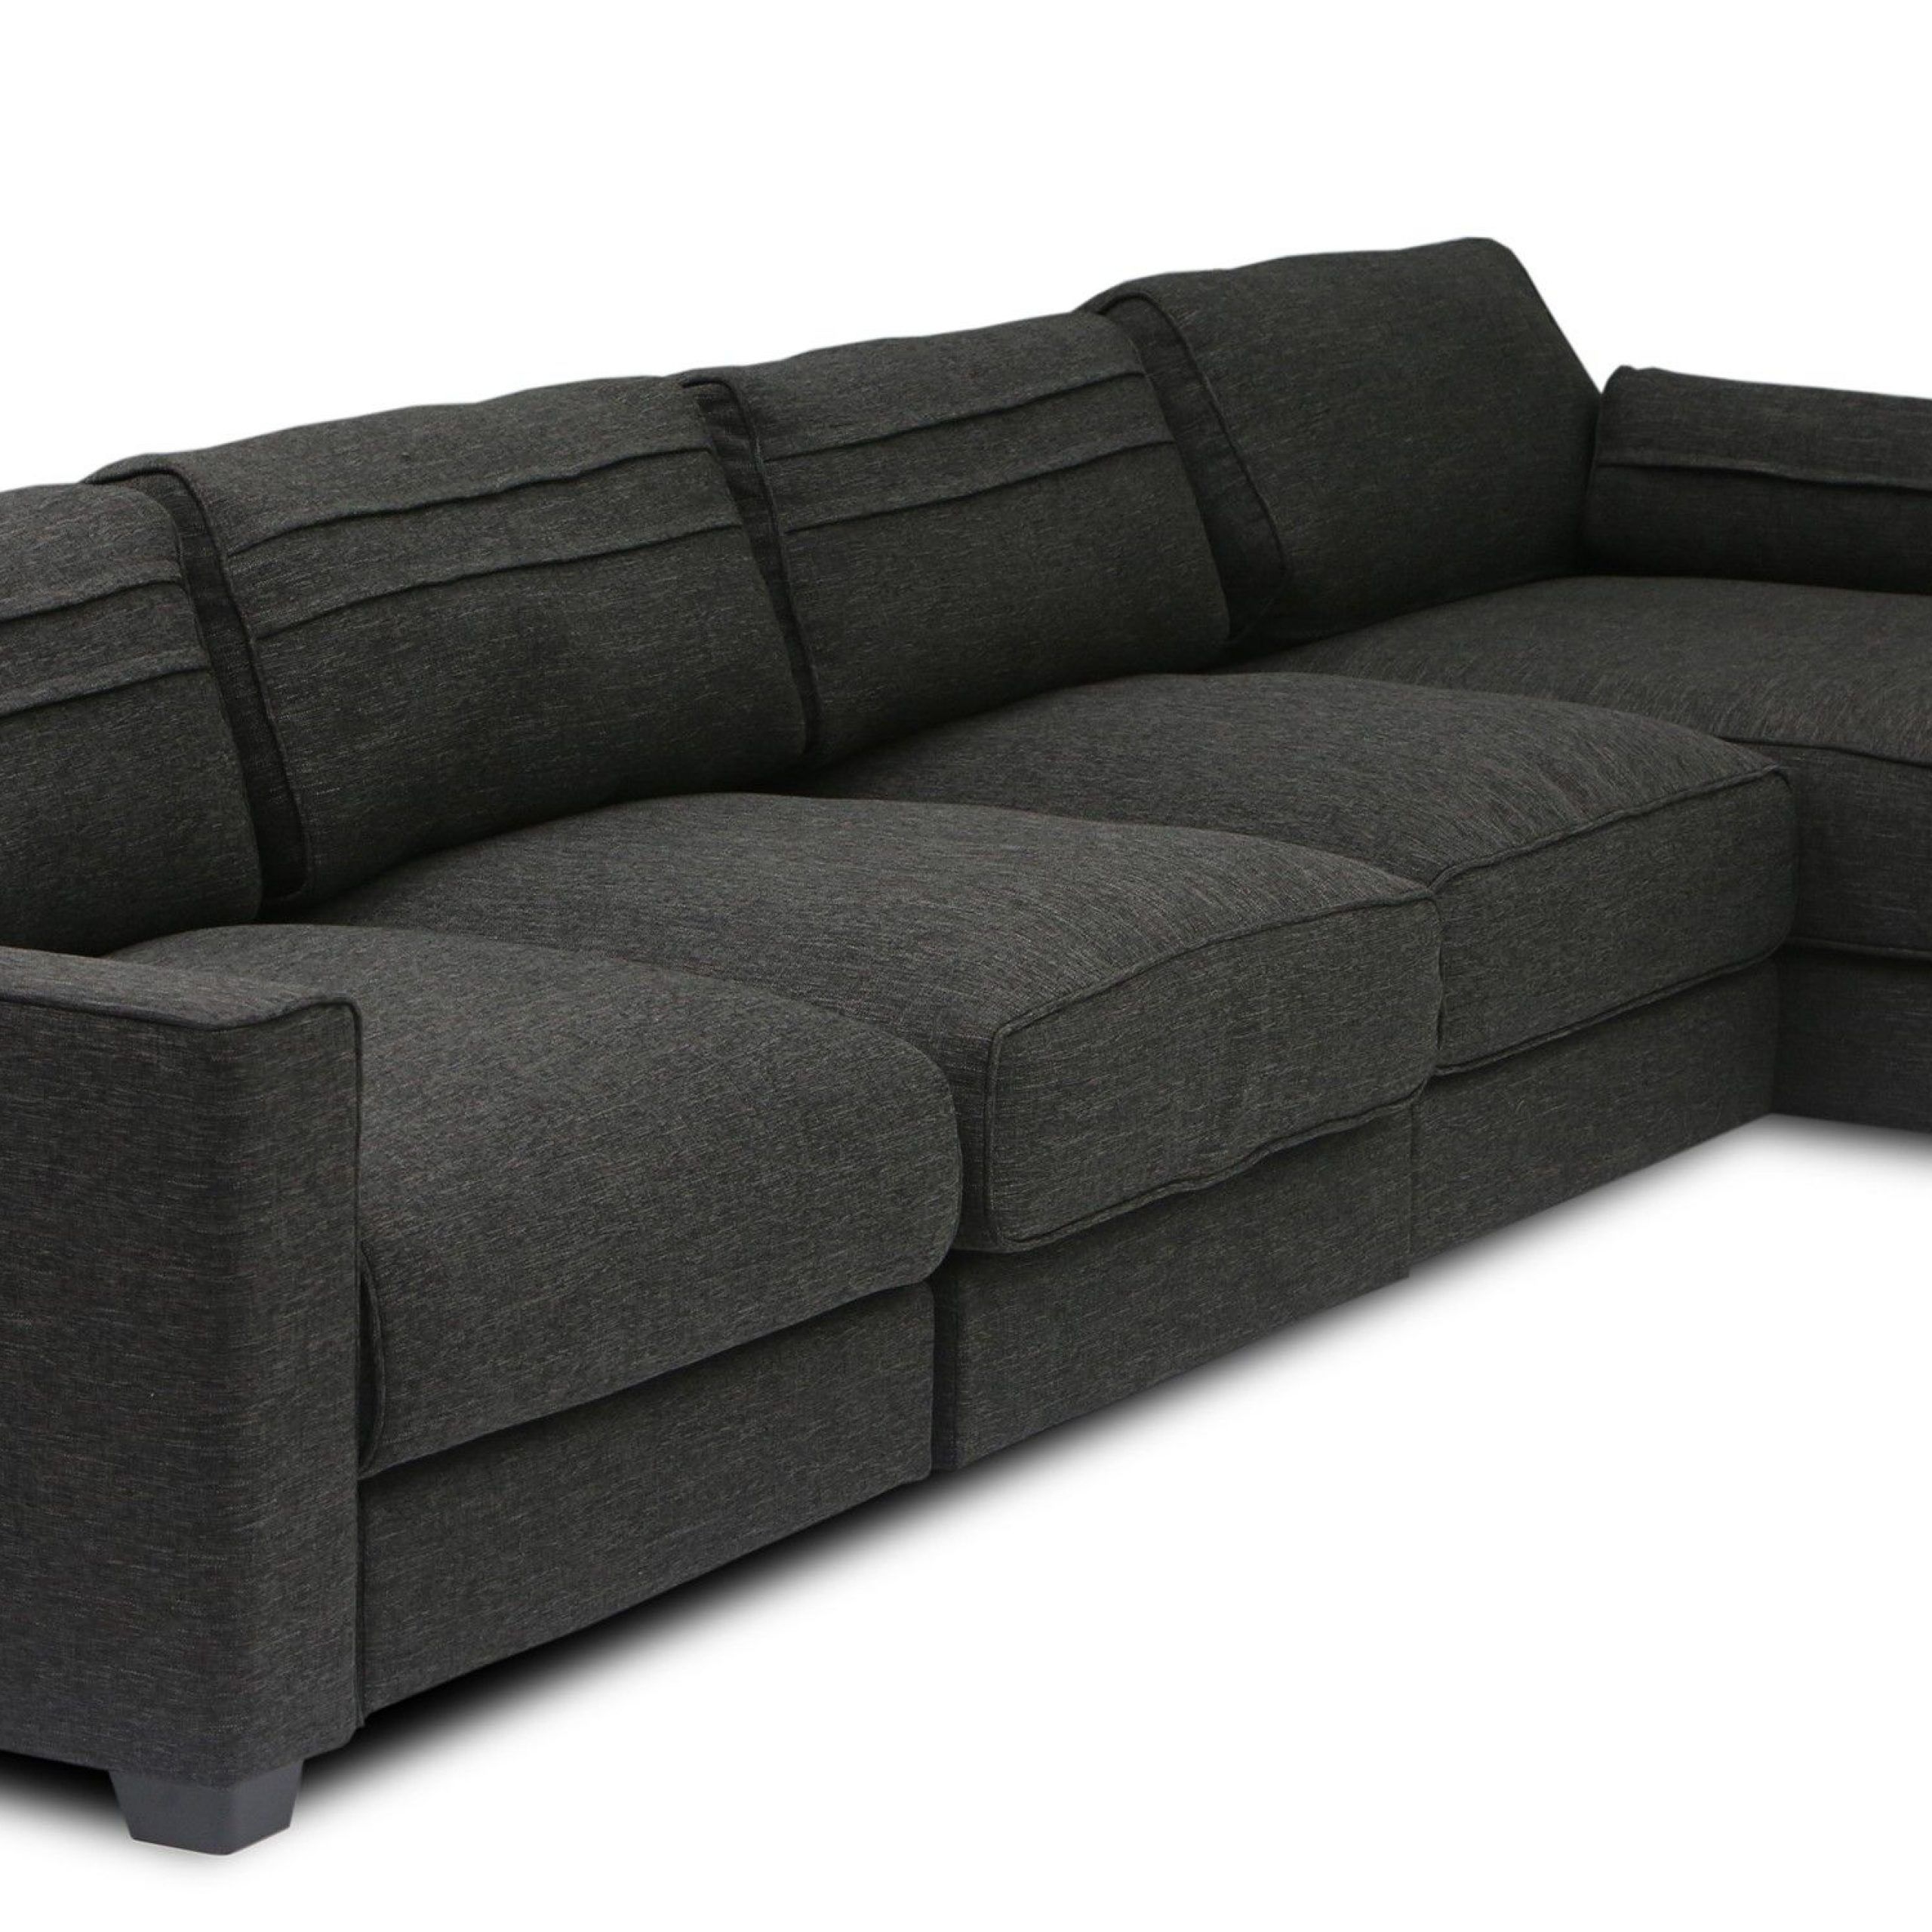 Vani Modular 3 Seat Right Sectional With Chaise Within Alani Mid Century Modern Sectional Sofas With Chaise (View 11 of 15)